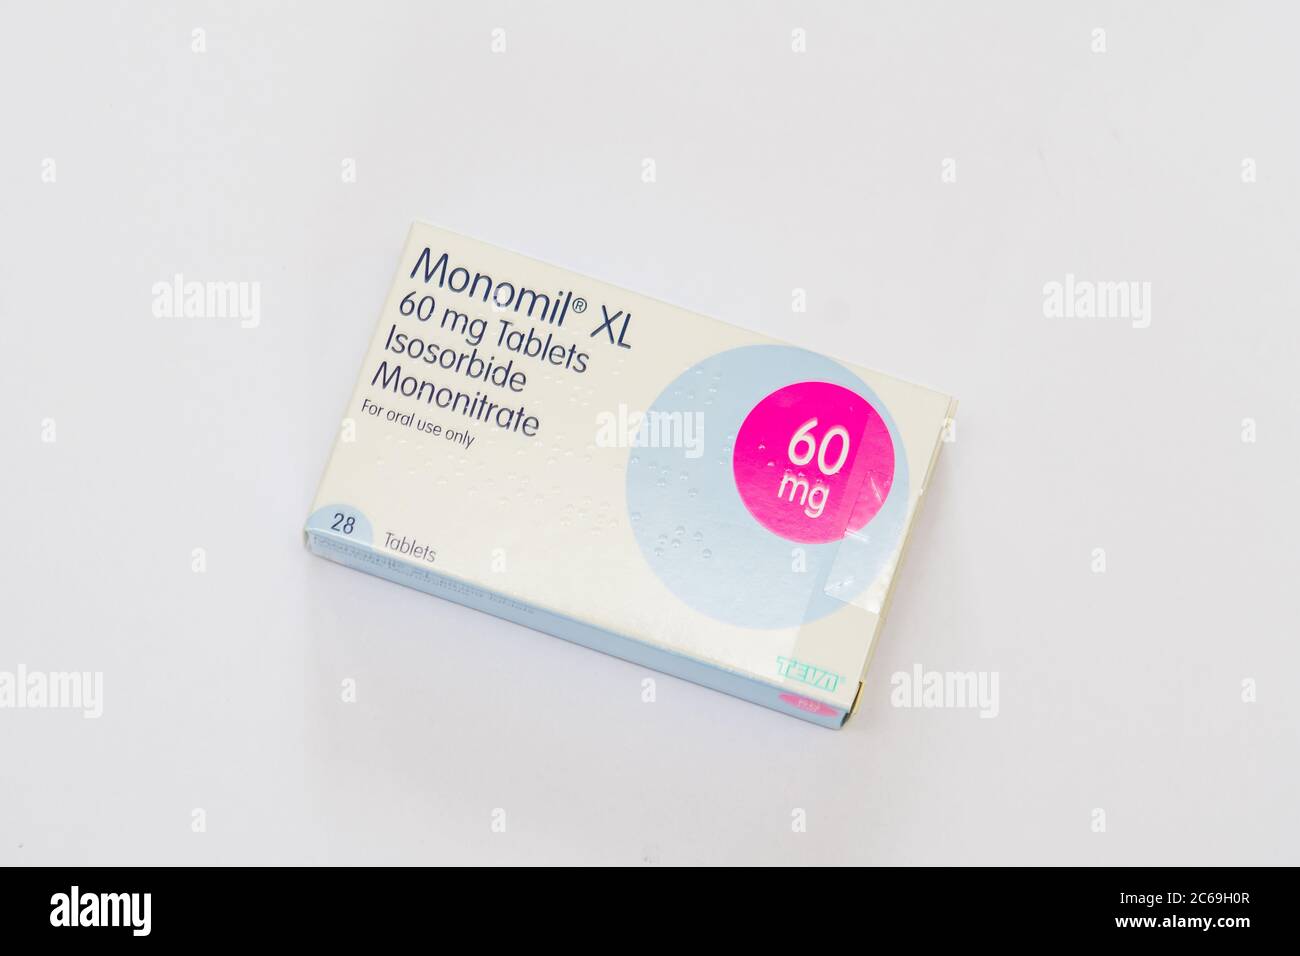 Monomil XL for the treatment of angina pain Stock Photo